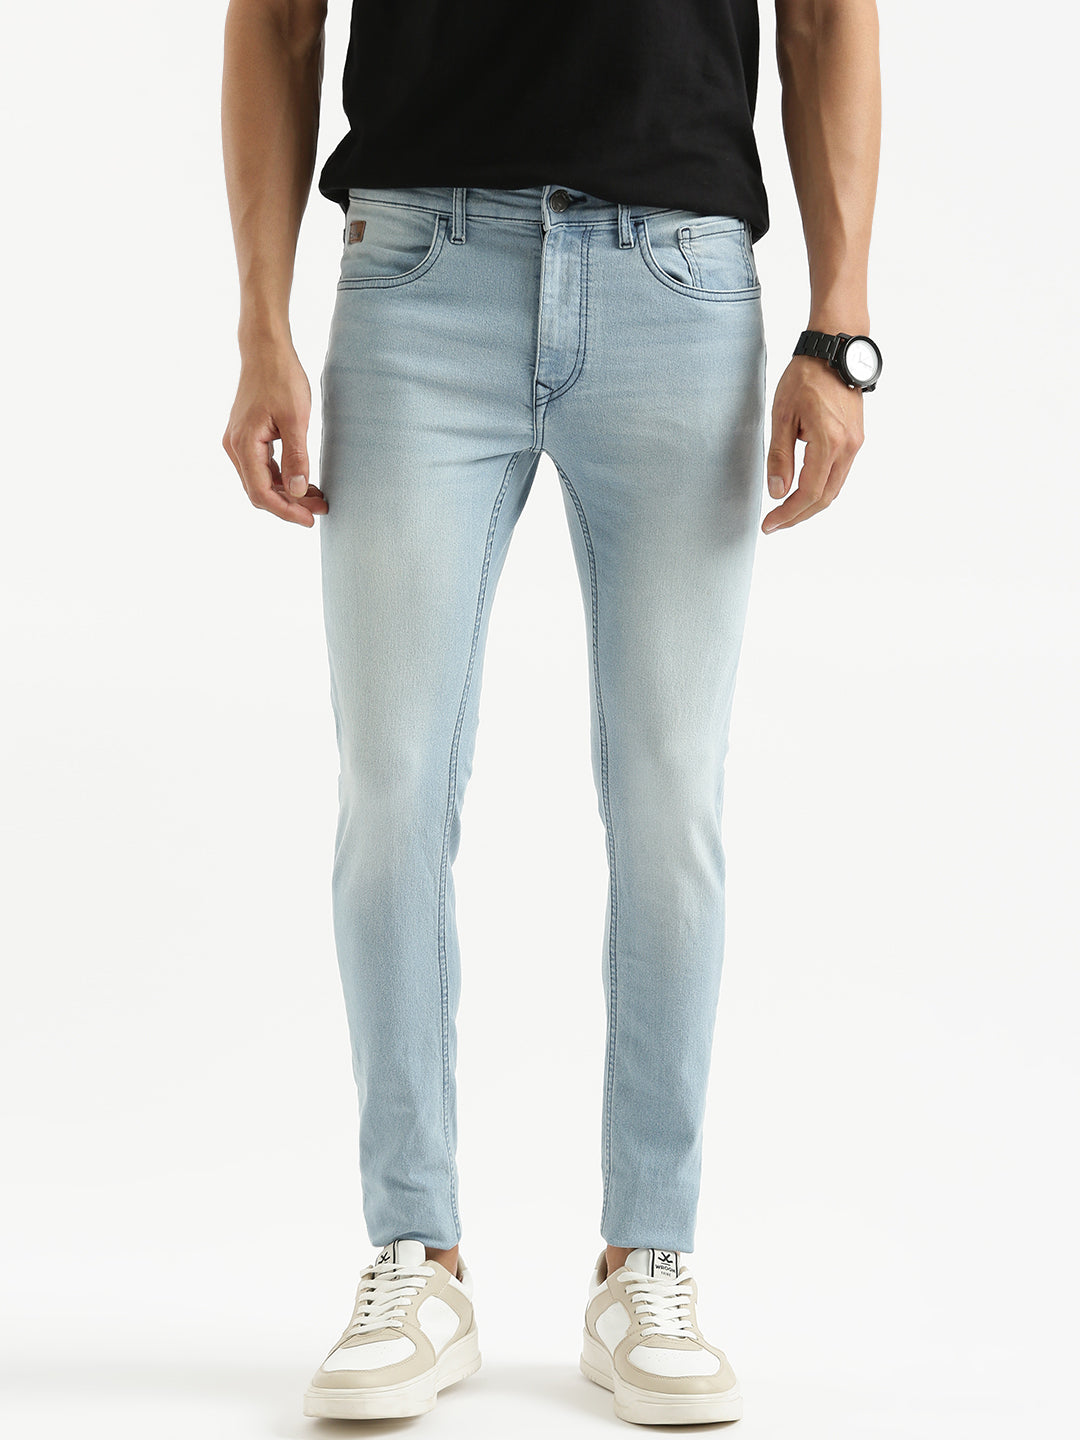 Chic Skinny Fit Jeans